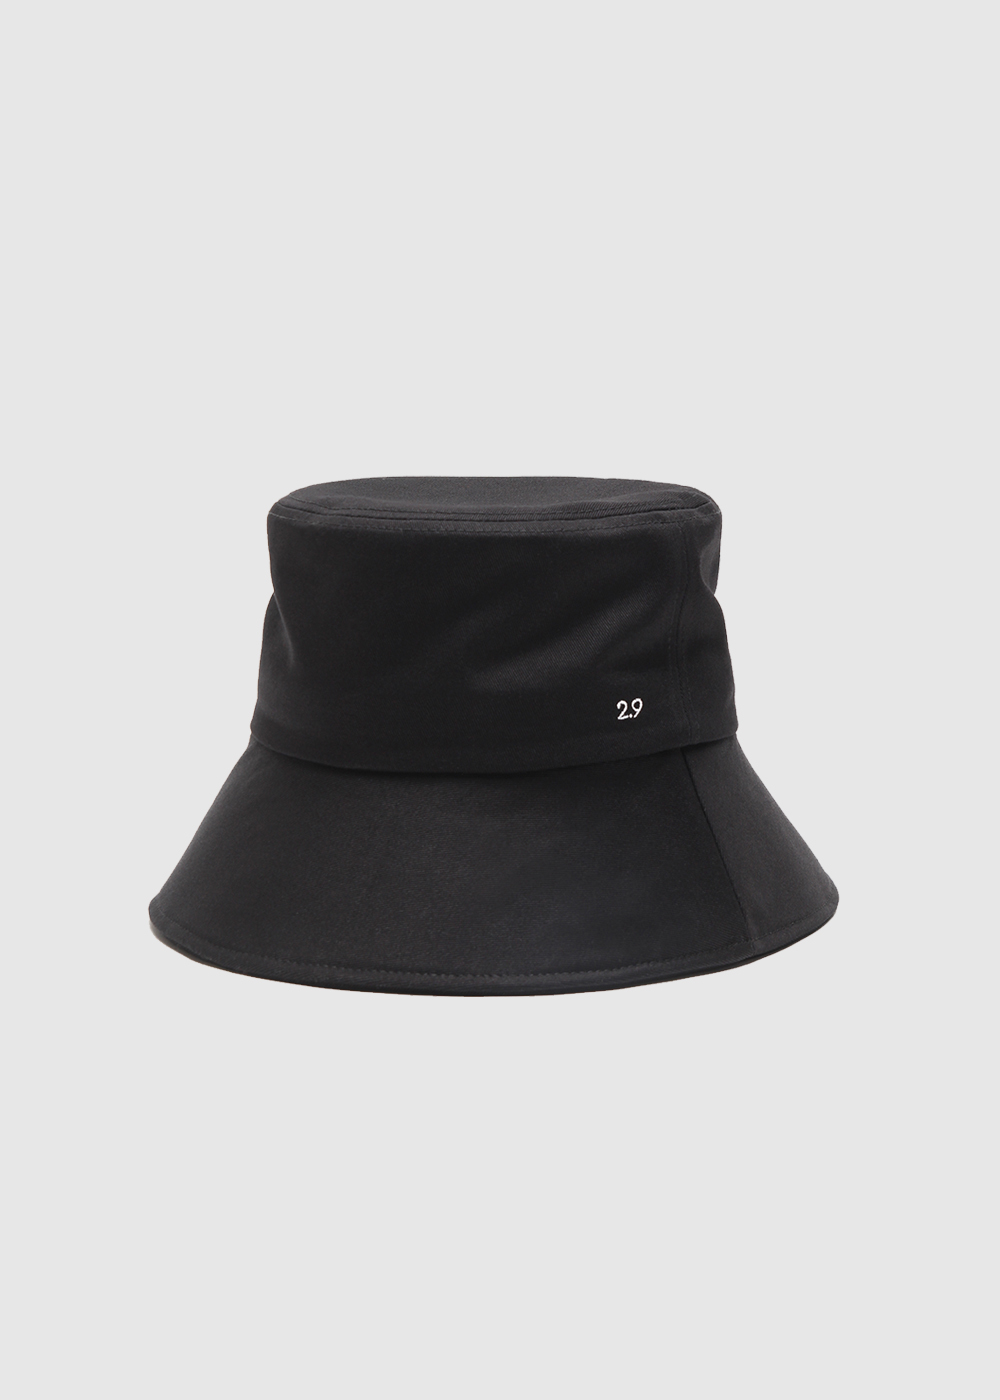 [sold out] classic bucket 2.9 black